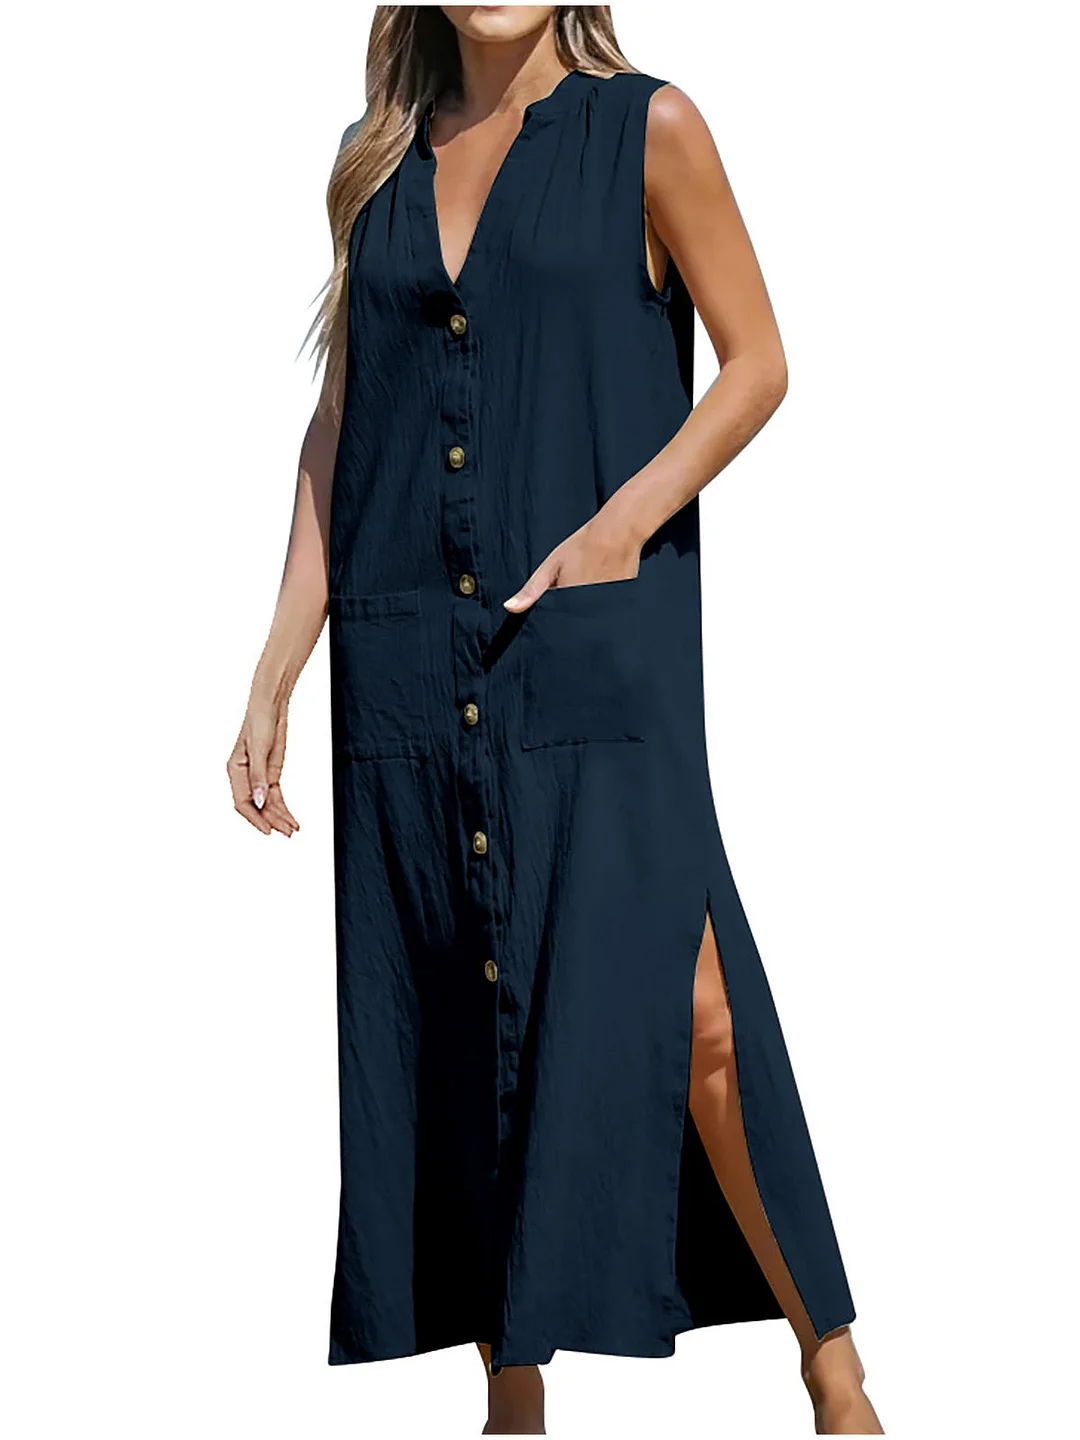 Women plus size clothing Women's Sleeveless V-neck Solid Color Buttons Pockets Maxi Dress-Nordswear